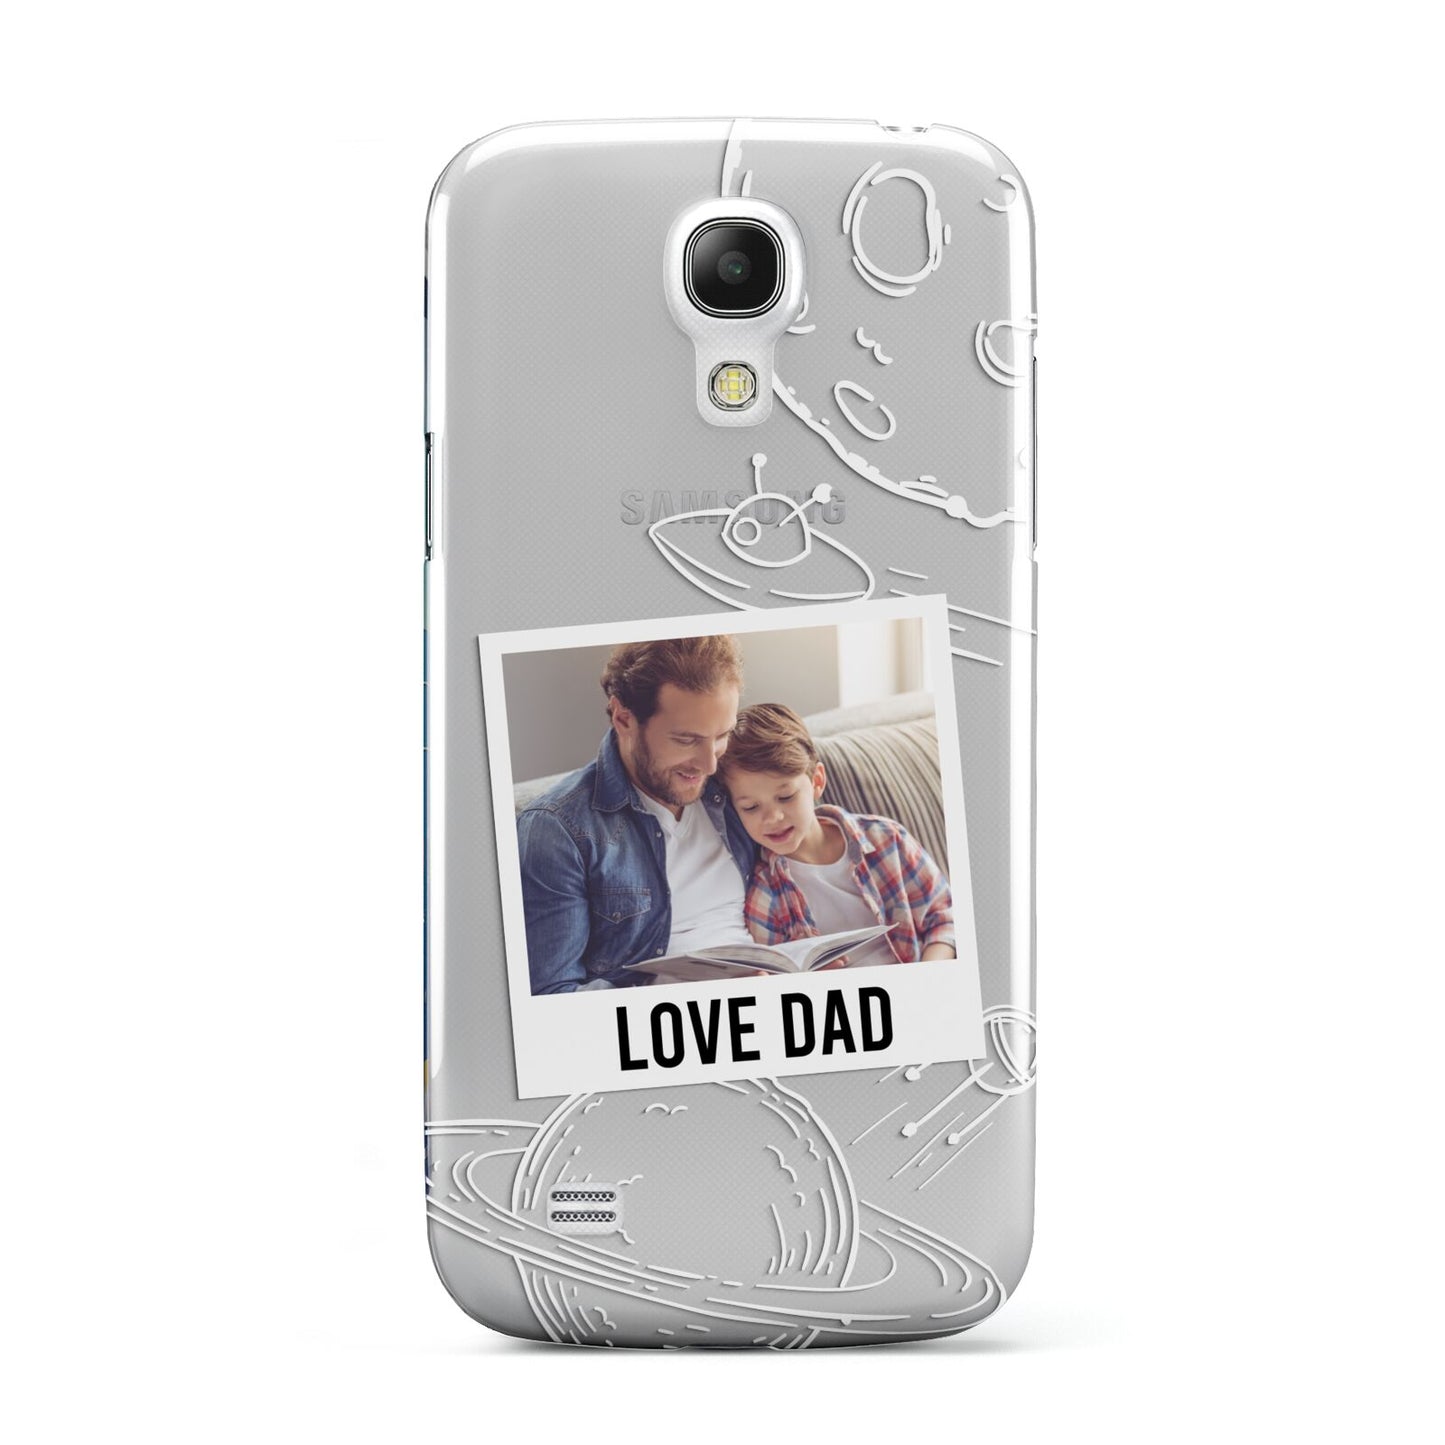 Personalised From Dad Photo Samsung Galaxy S4 Mini Case